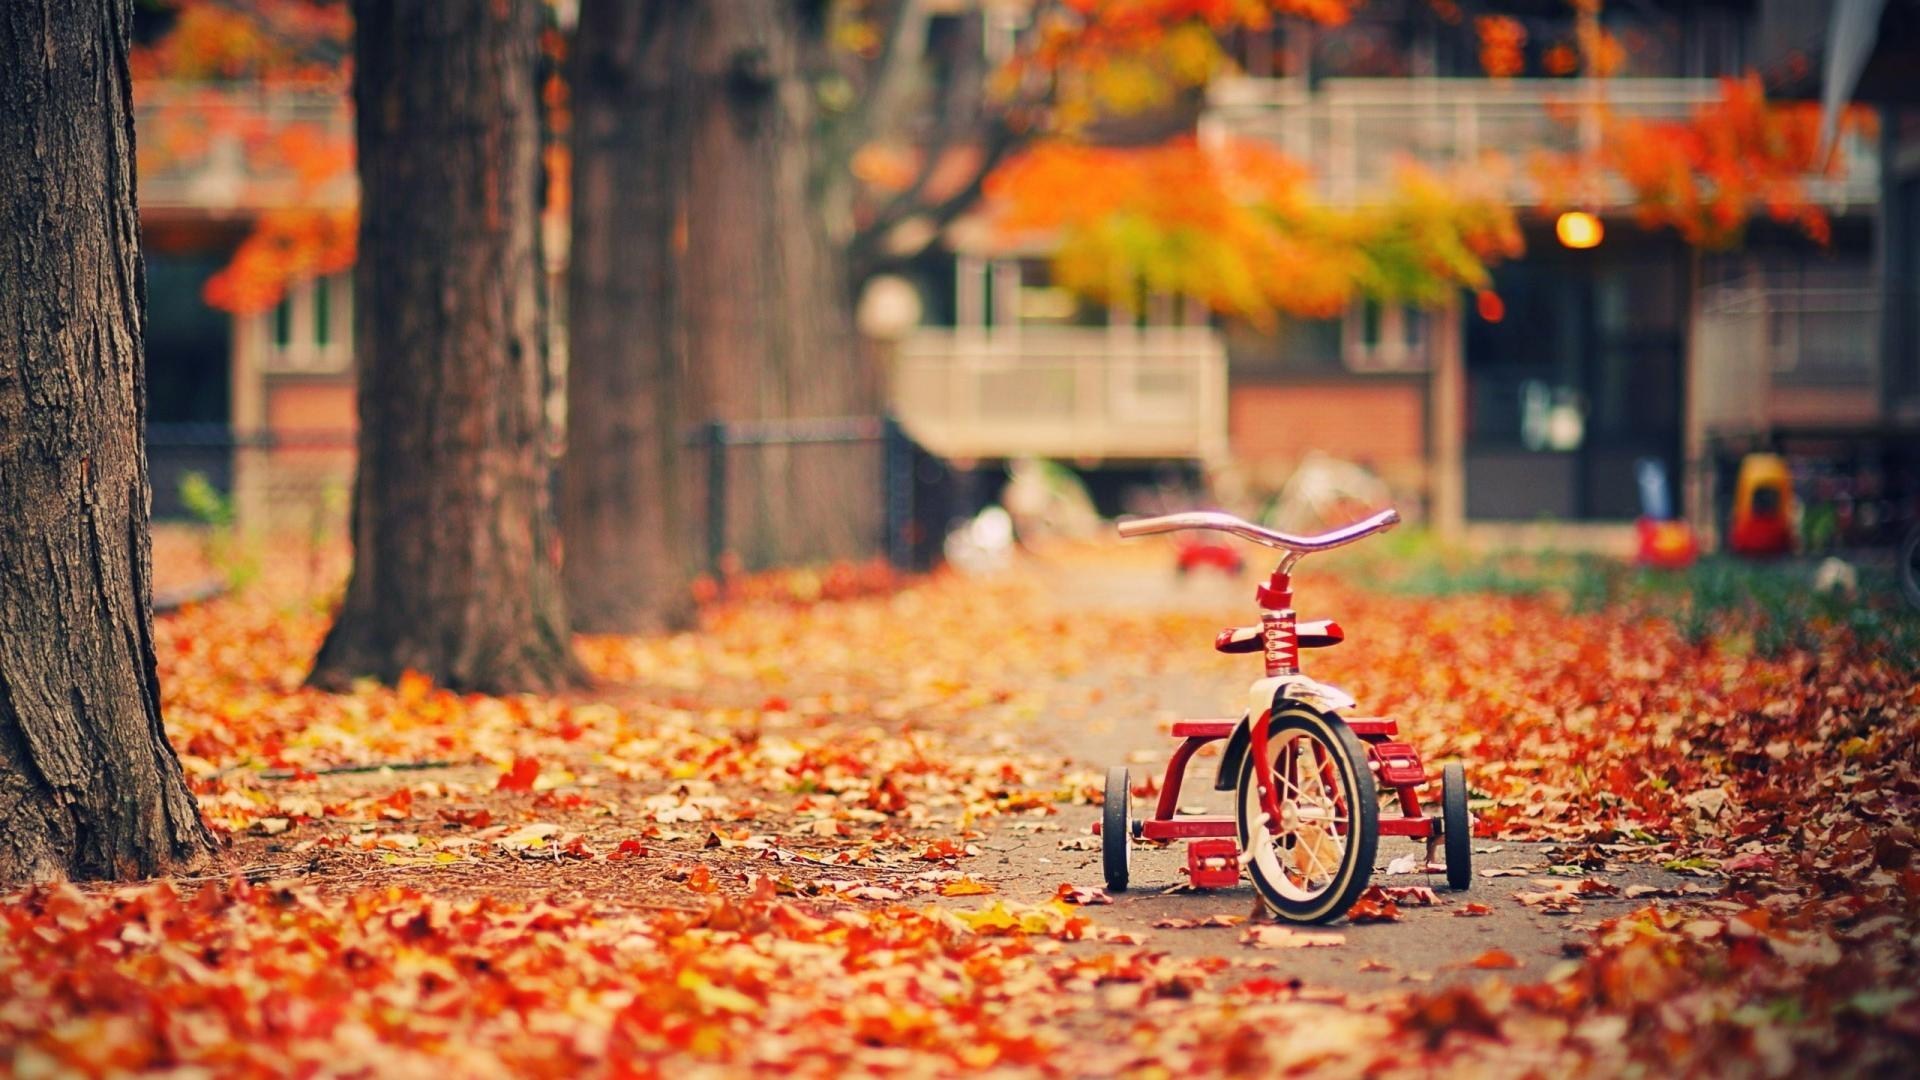 Tricycle Trees Fallen Leaves Autumn Photo